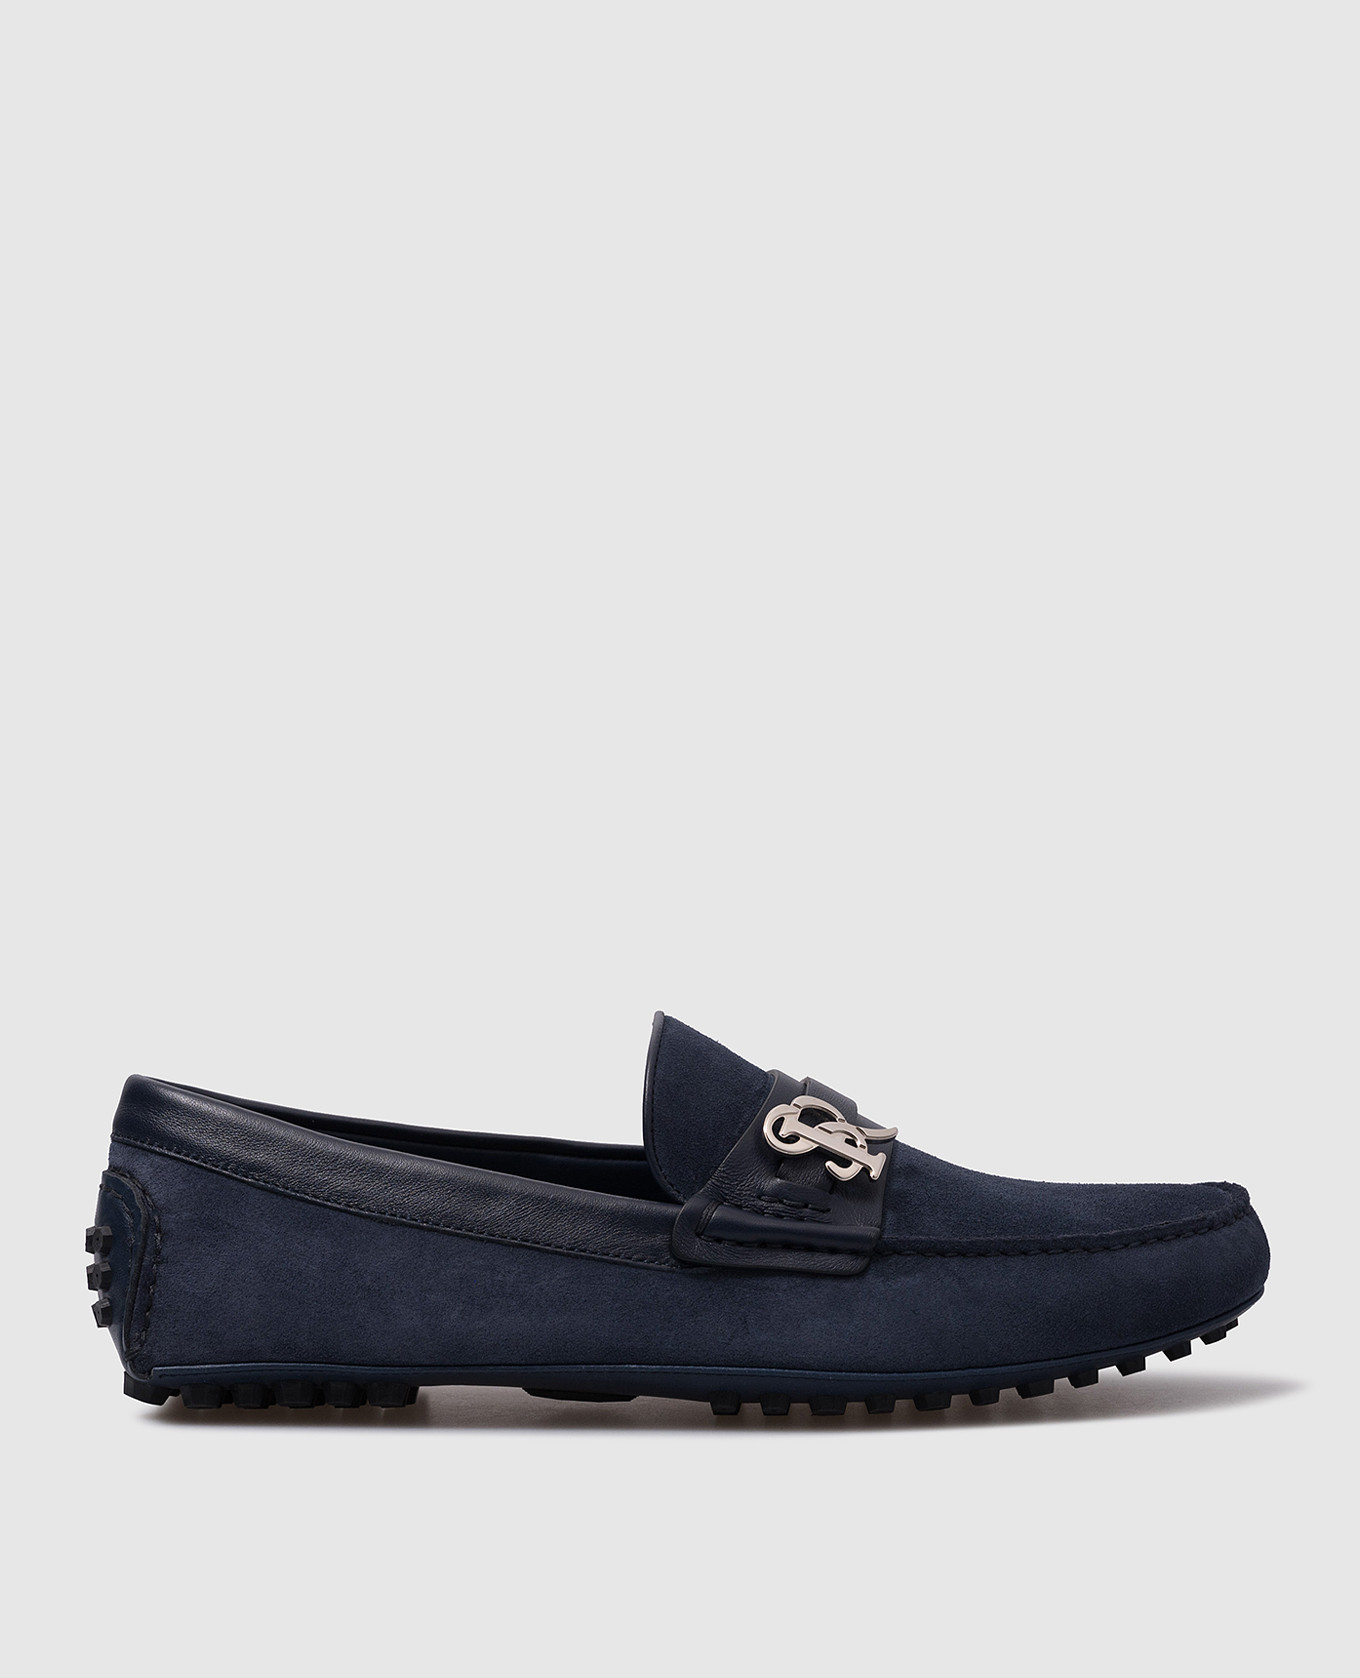 Blue suede moccasins with metallic logo